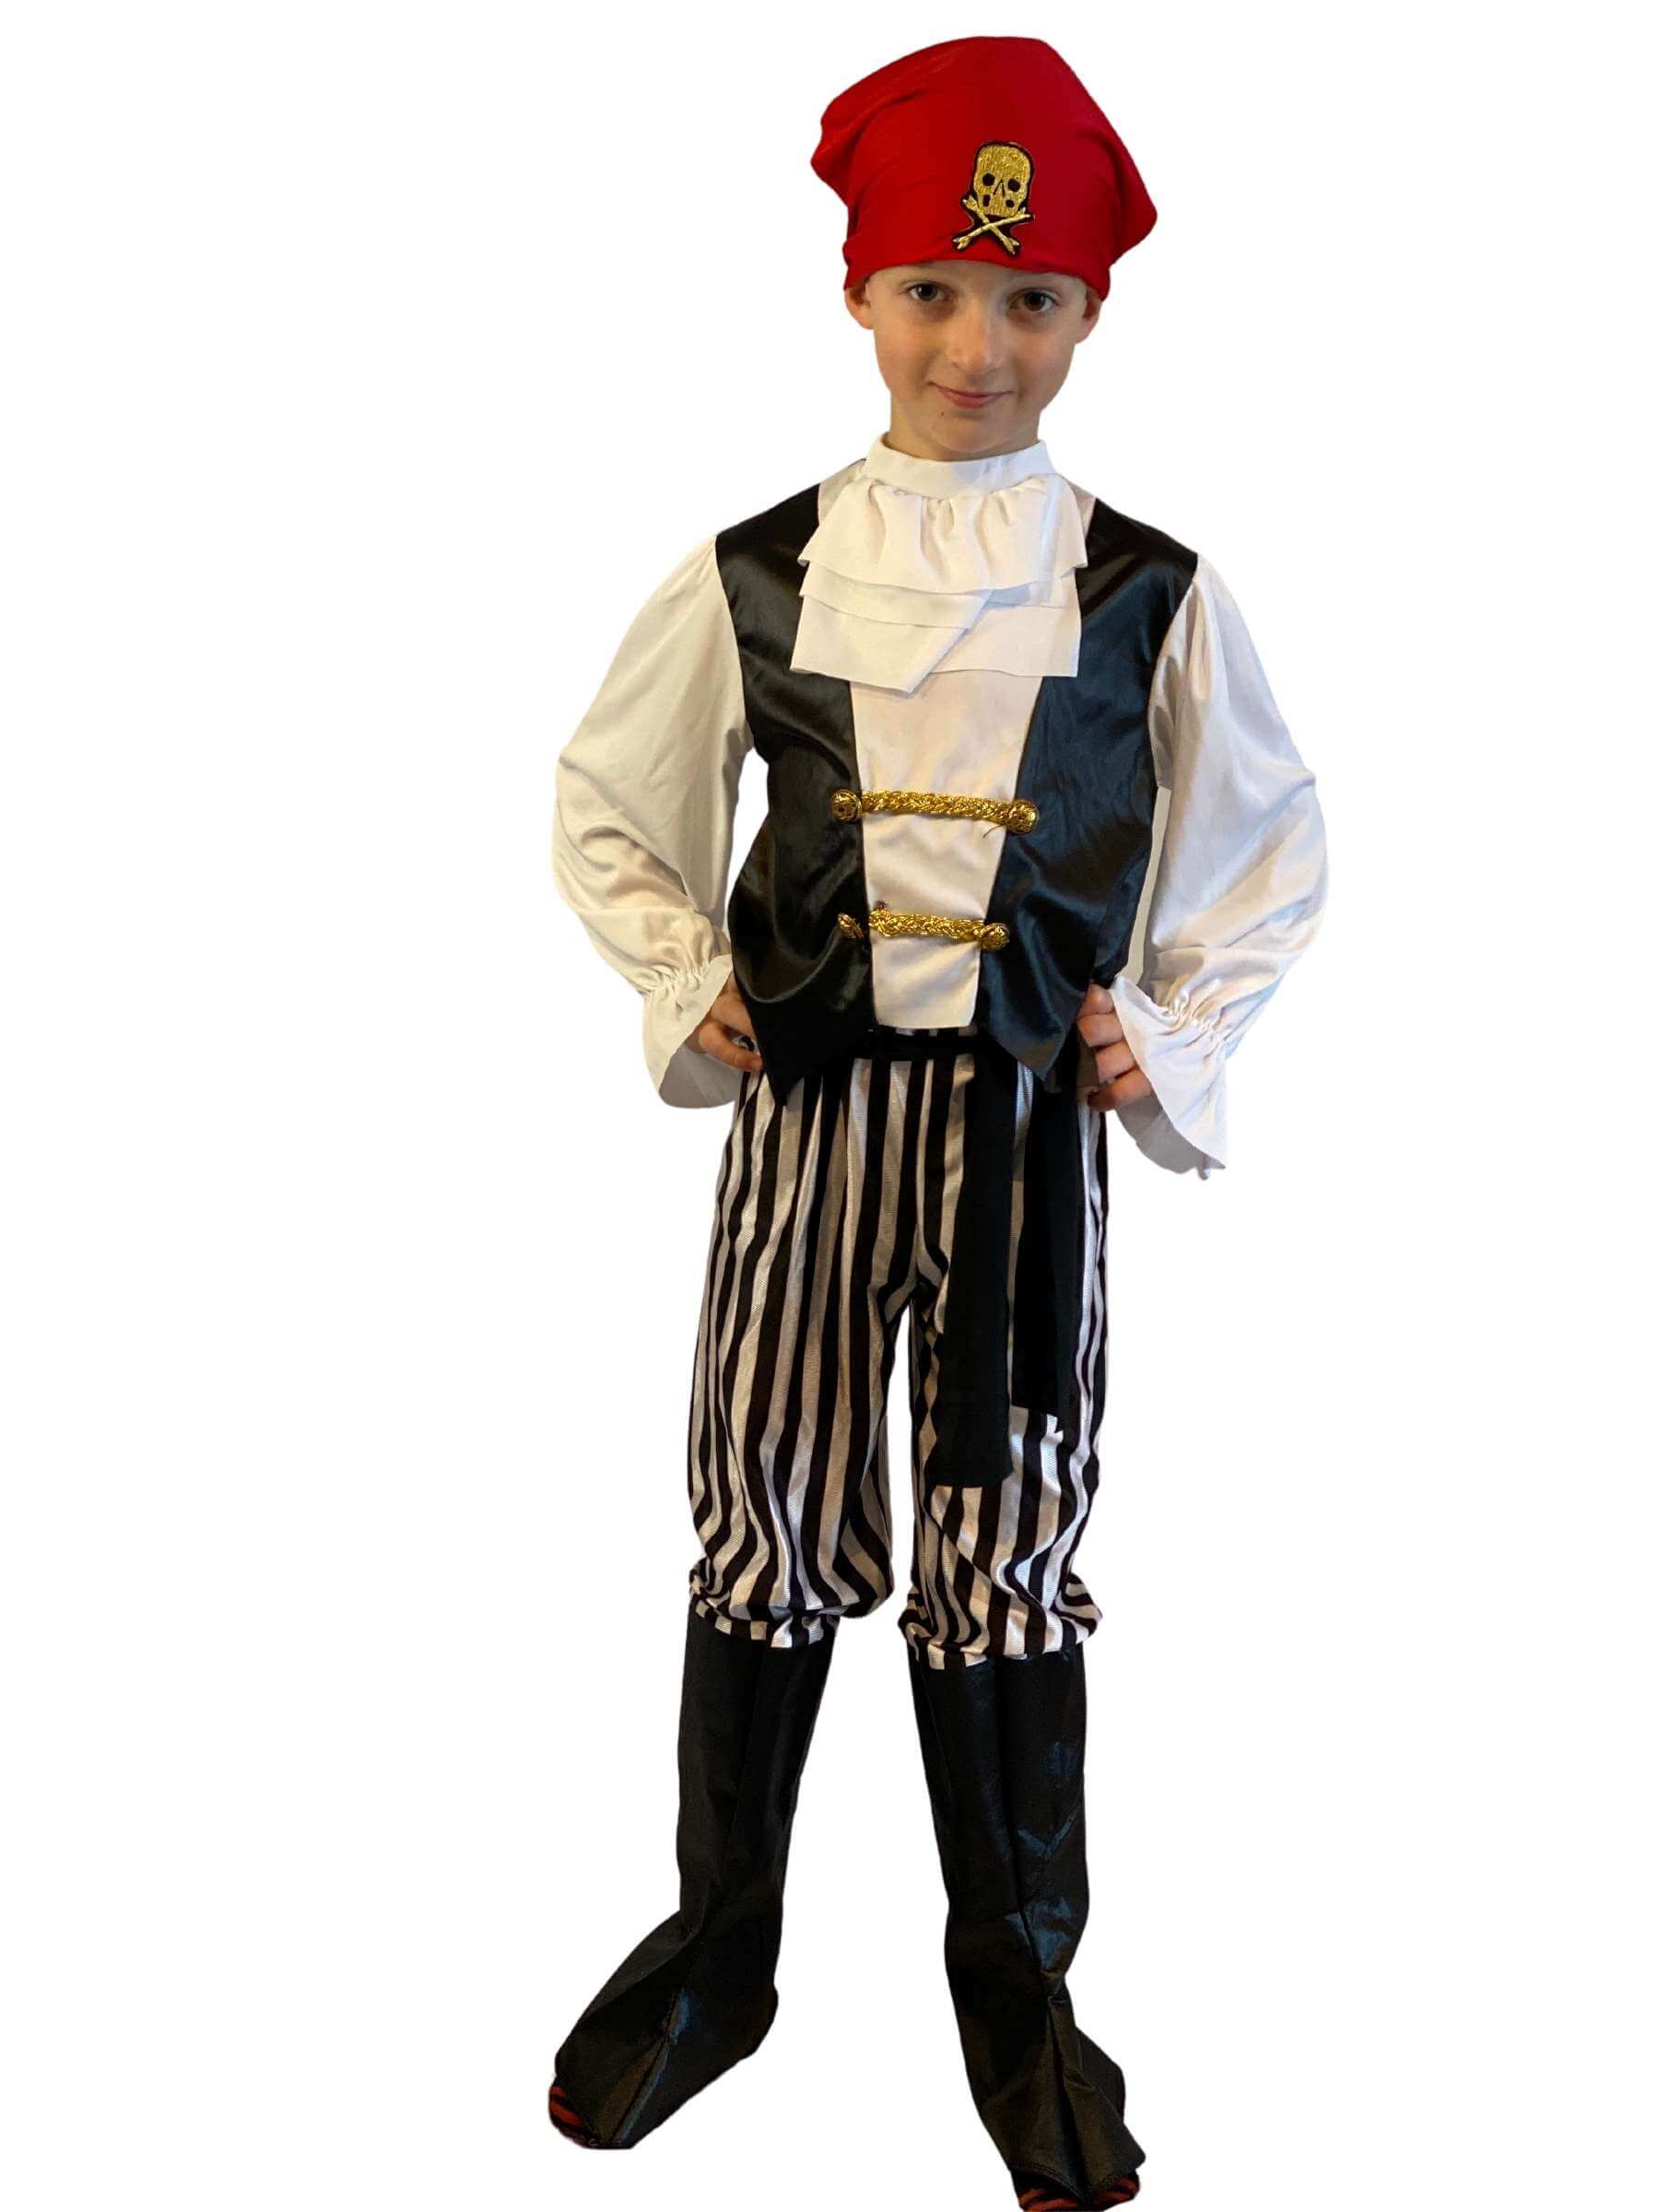 Boy wearing a black and white pirate costume with ruffled neck, black and white vertical striped trousers with attached boot covers and a red bandana.